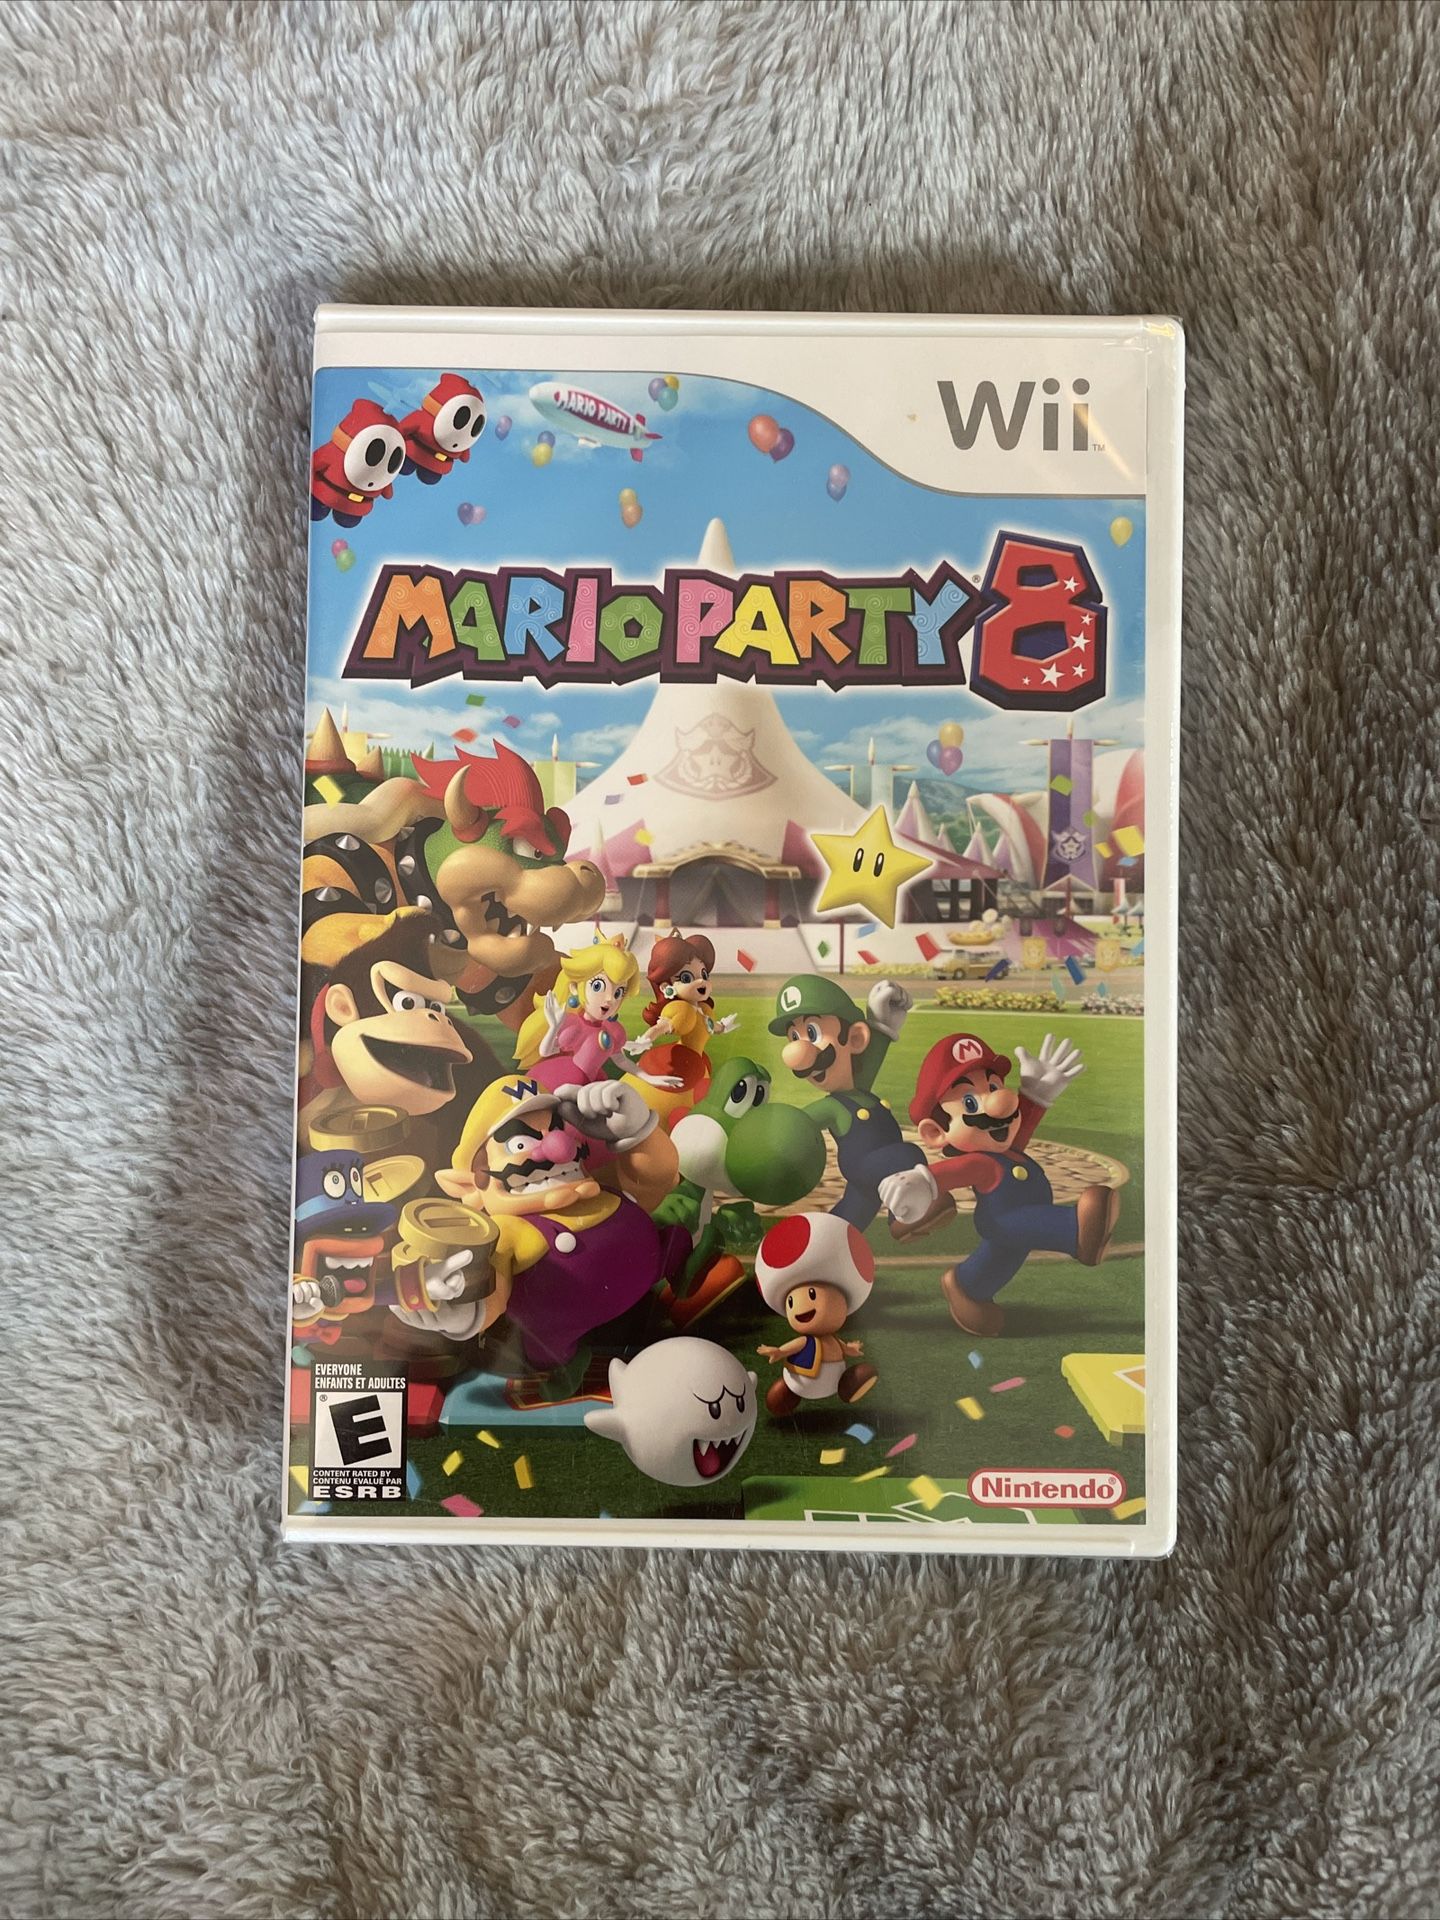 Mario Party 8 Wii Game Nintendo E Vivid Appearance Action Adventure Wonderful~Brand New Factory sealed